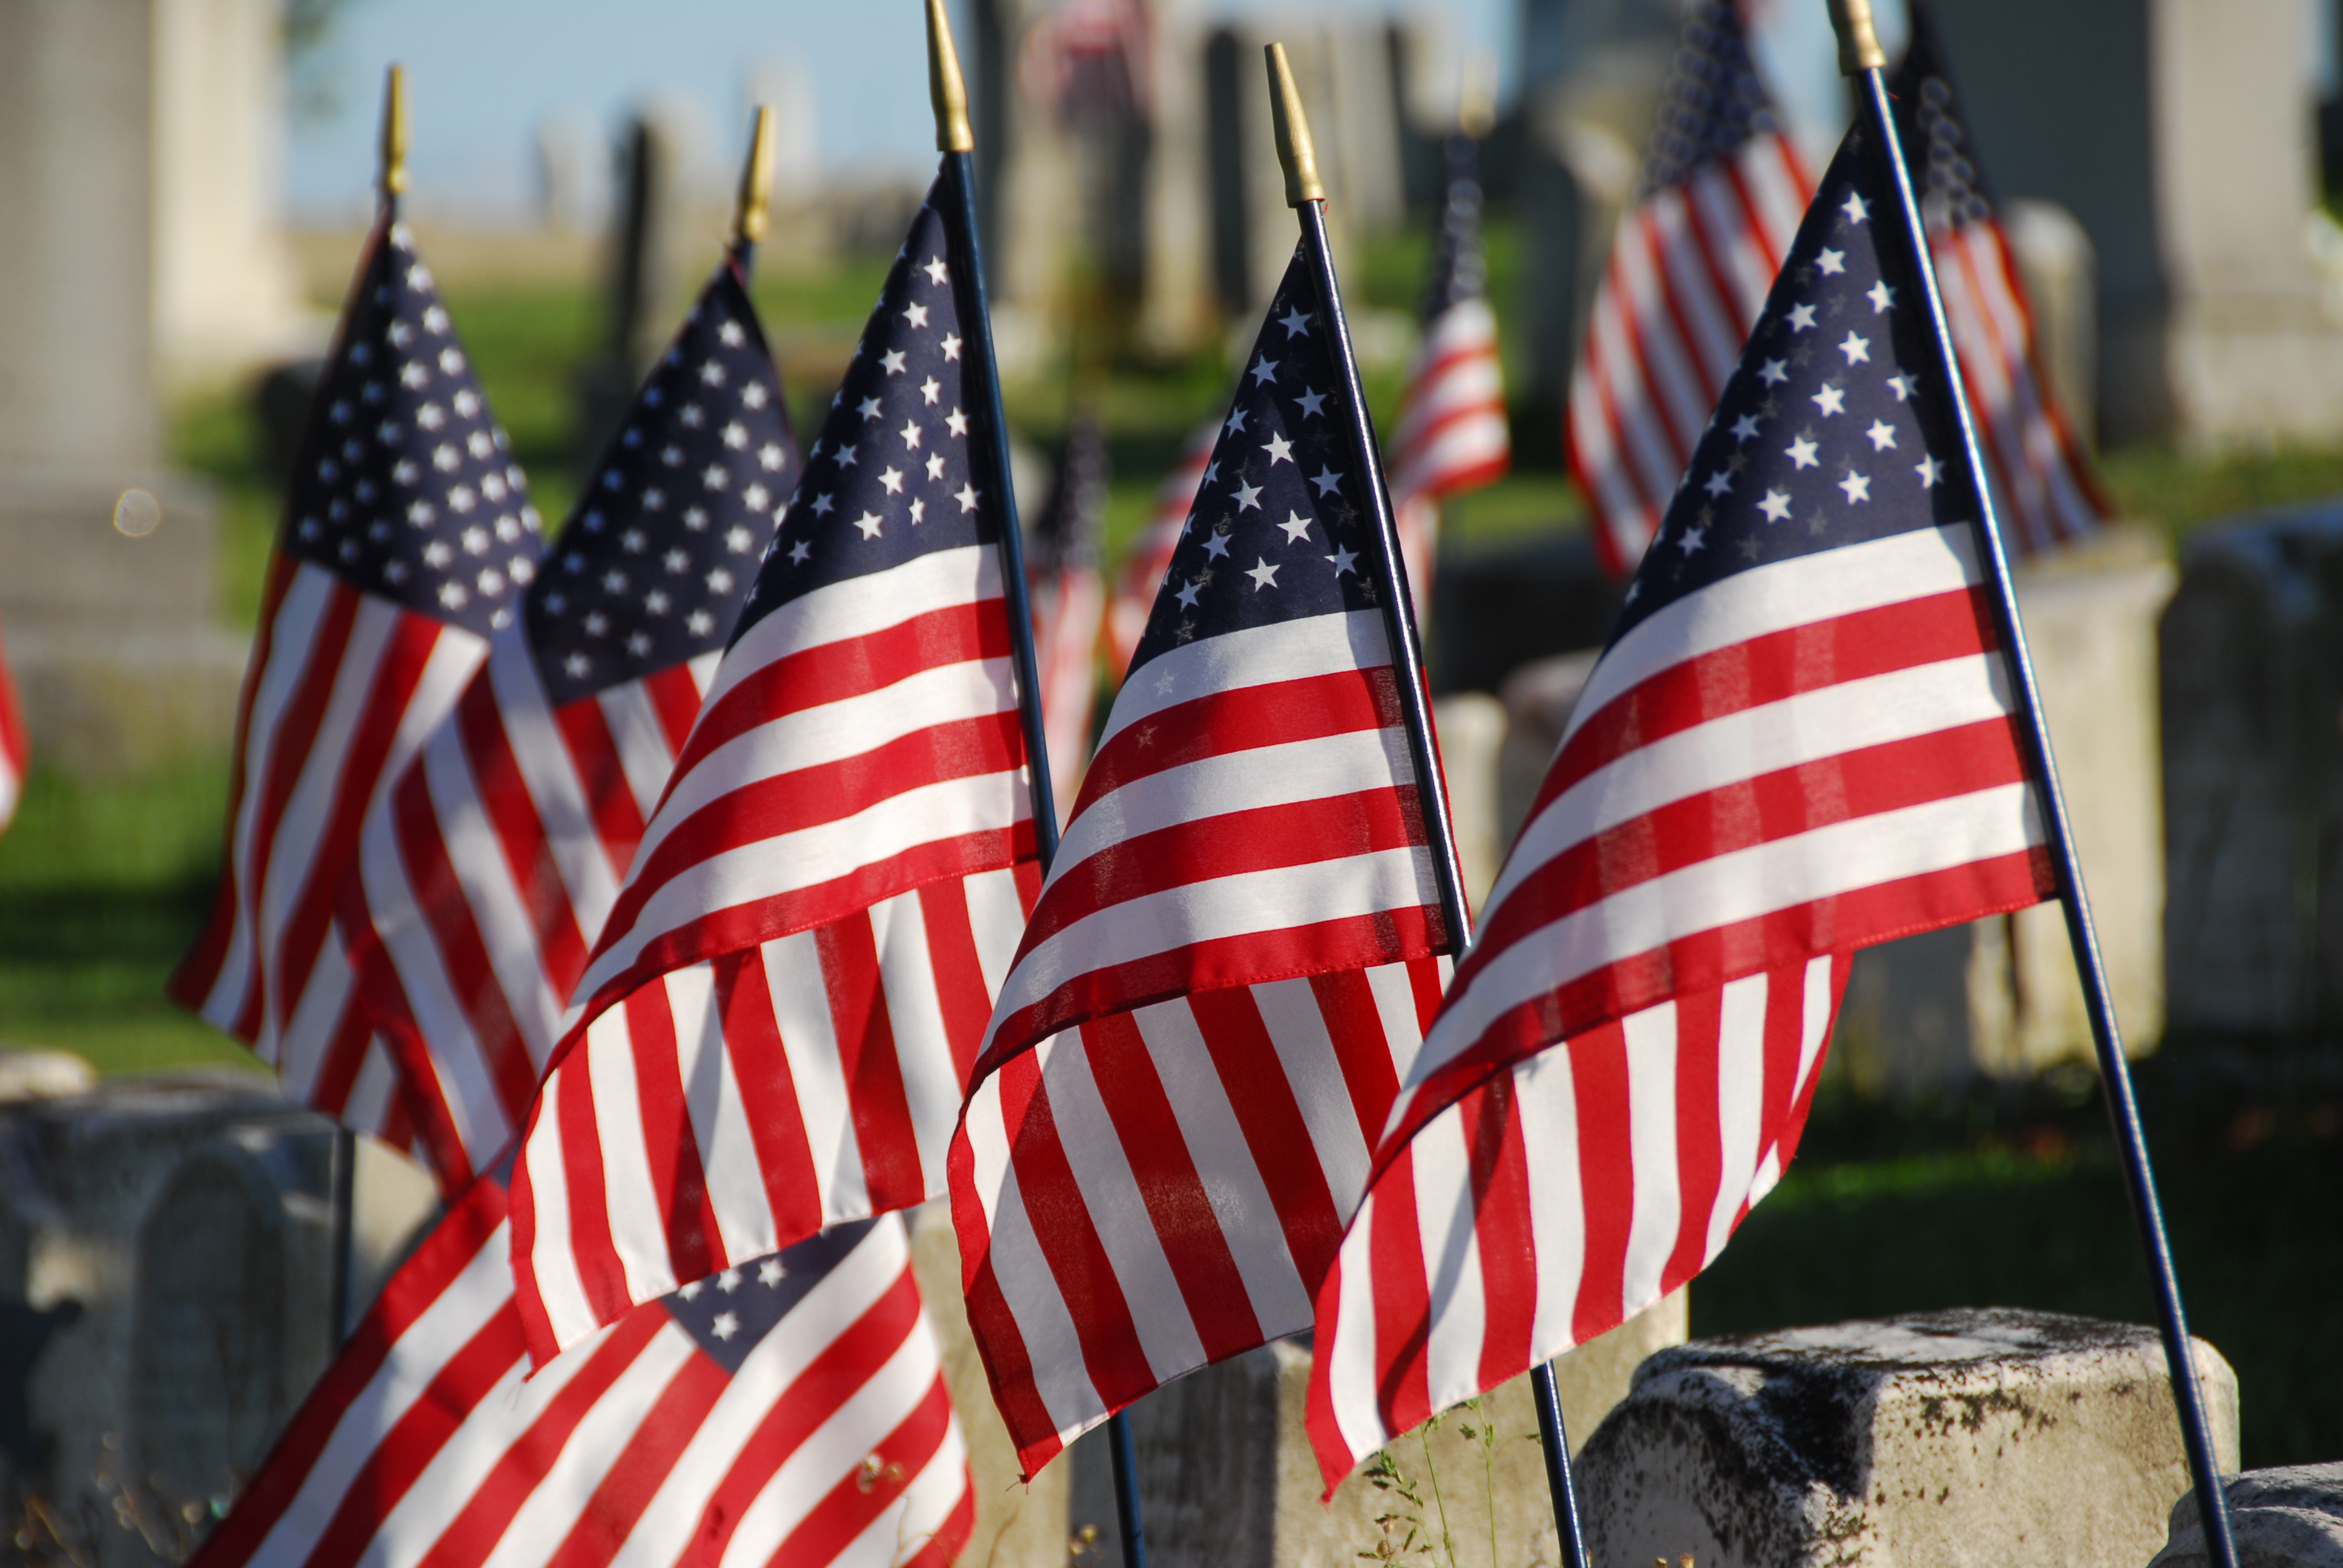 Have A Safe Memorial Day! | 93.3 WFLS